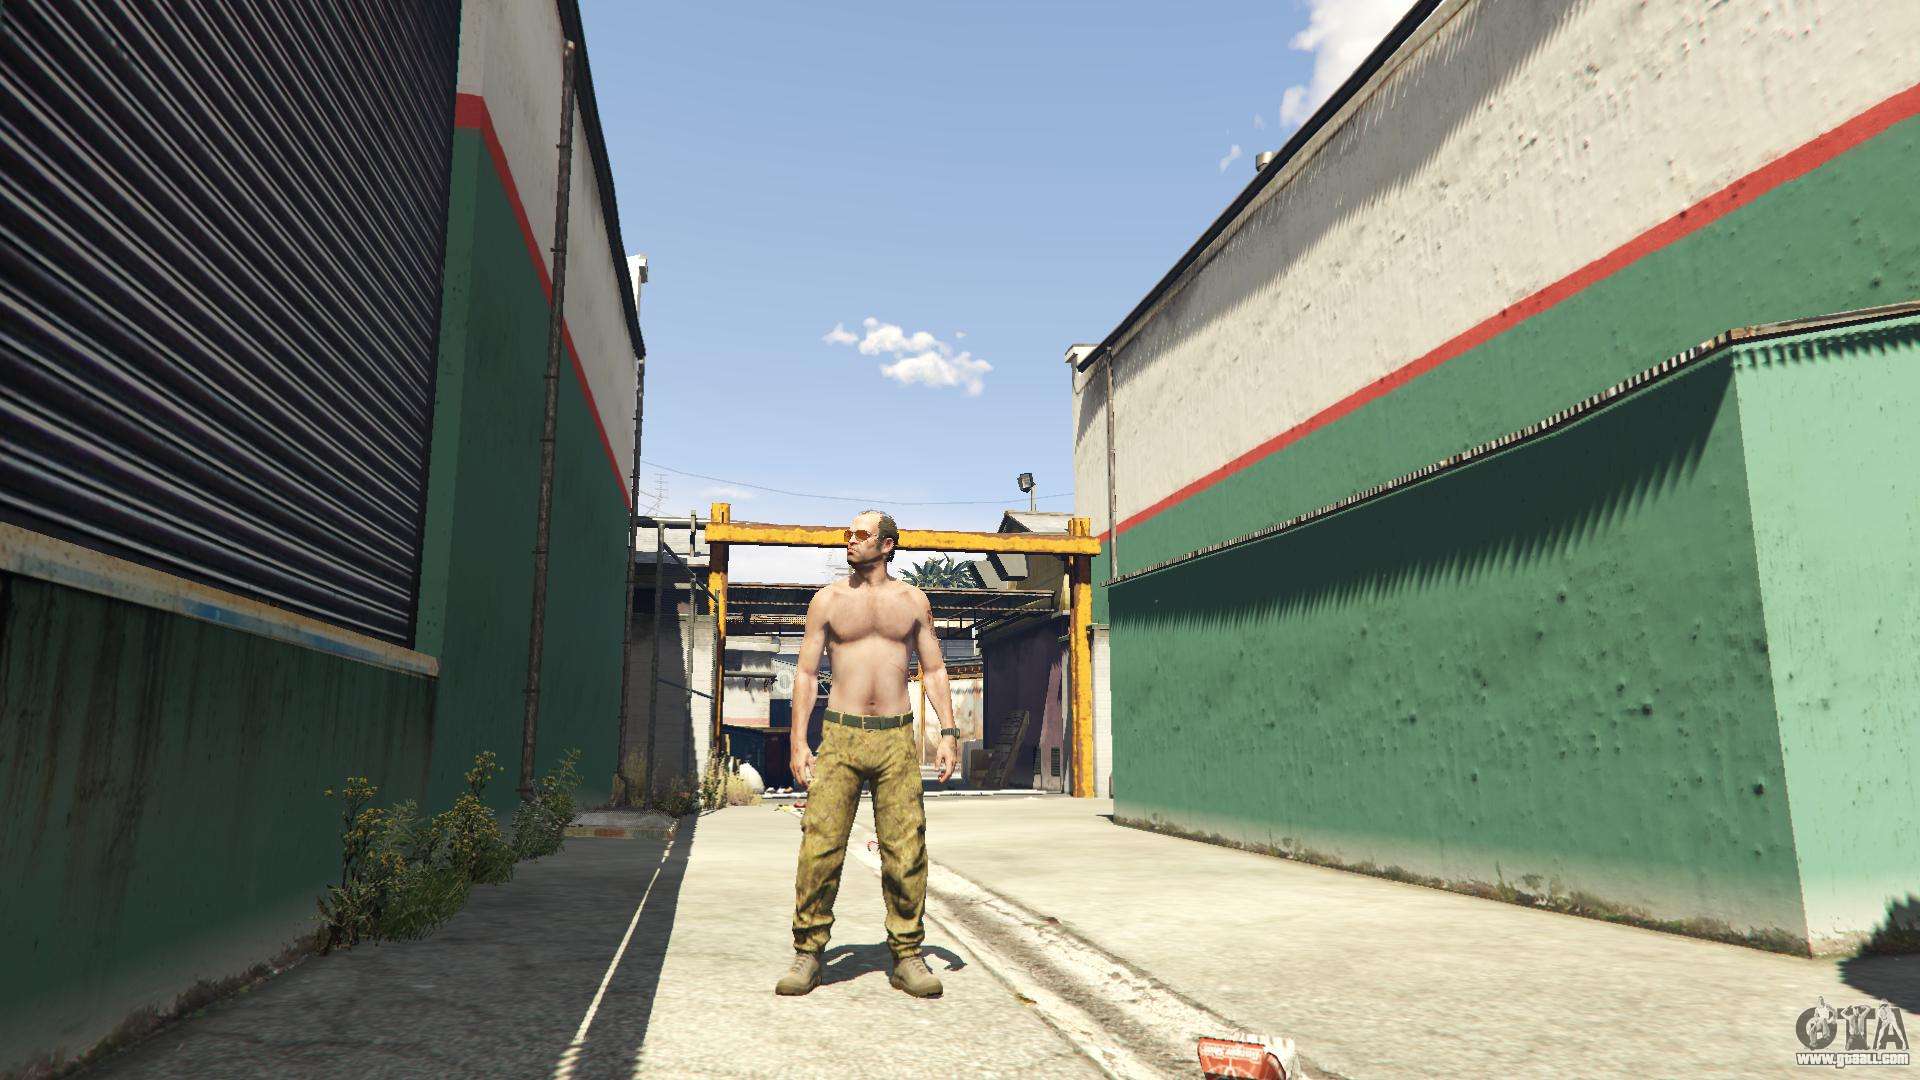 grand theft auto v - Is there a way to save an outfit in GTA V